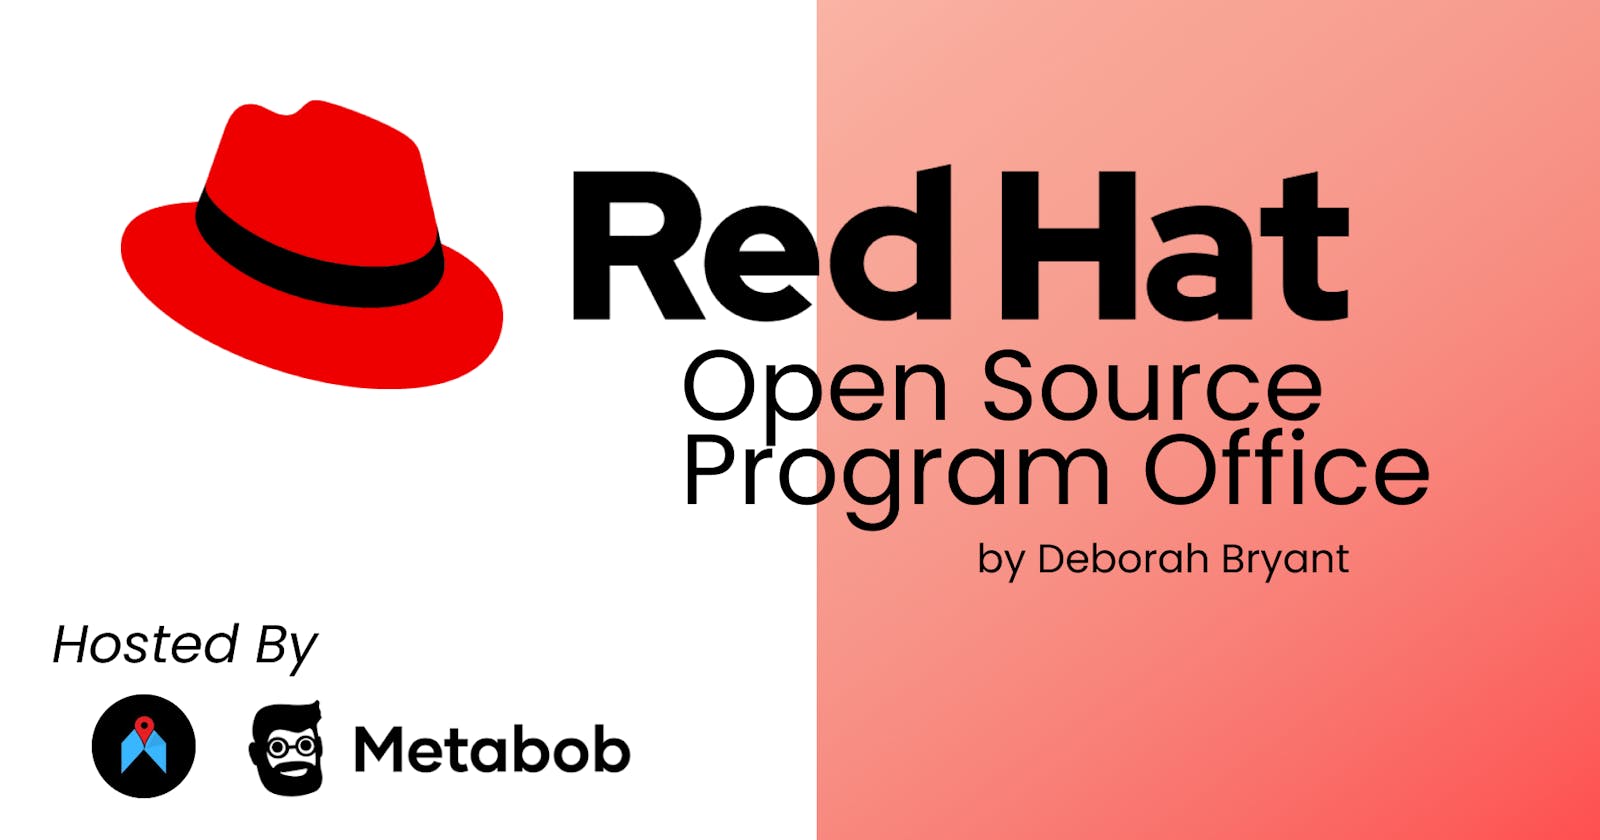 History of RedHat & Inside RedHat's Open Source Community